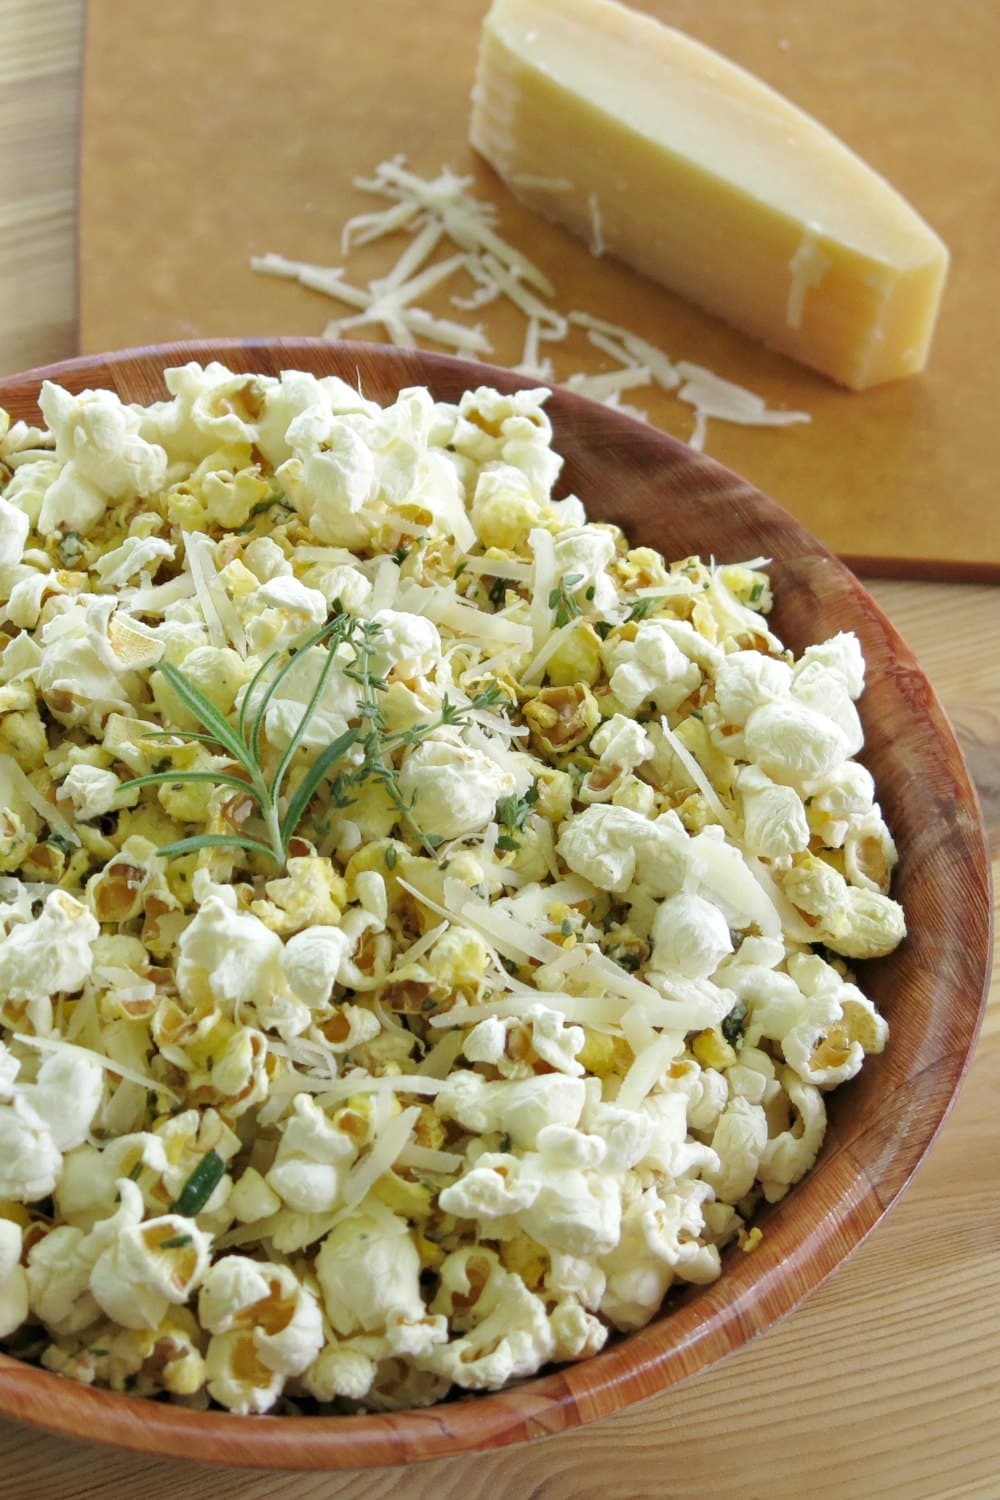 Big bowl of Savory Popcorn Recipe with Parmesan Cheese and Fresh Herbs